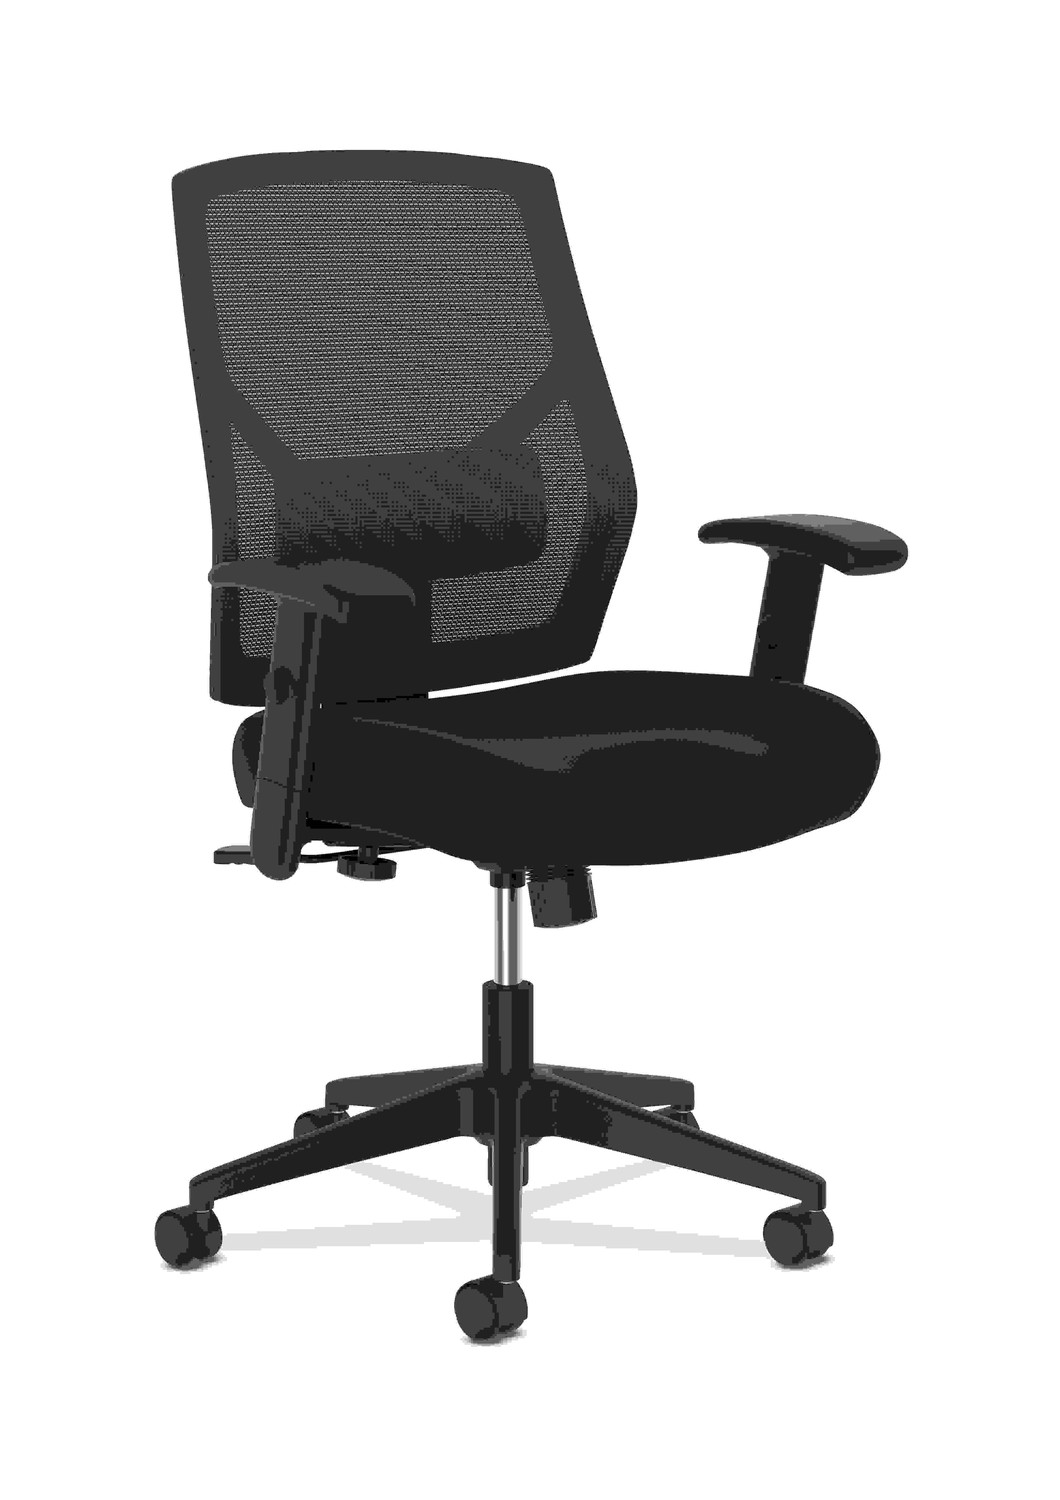 HON Crio High-Back Task Chair - Fabric Mesh Back Computer Chair for Office Desk, Black (HVL581)